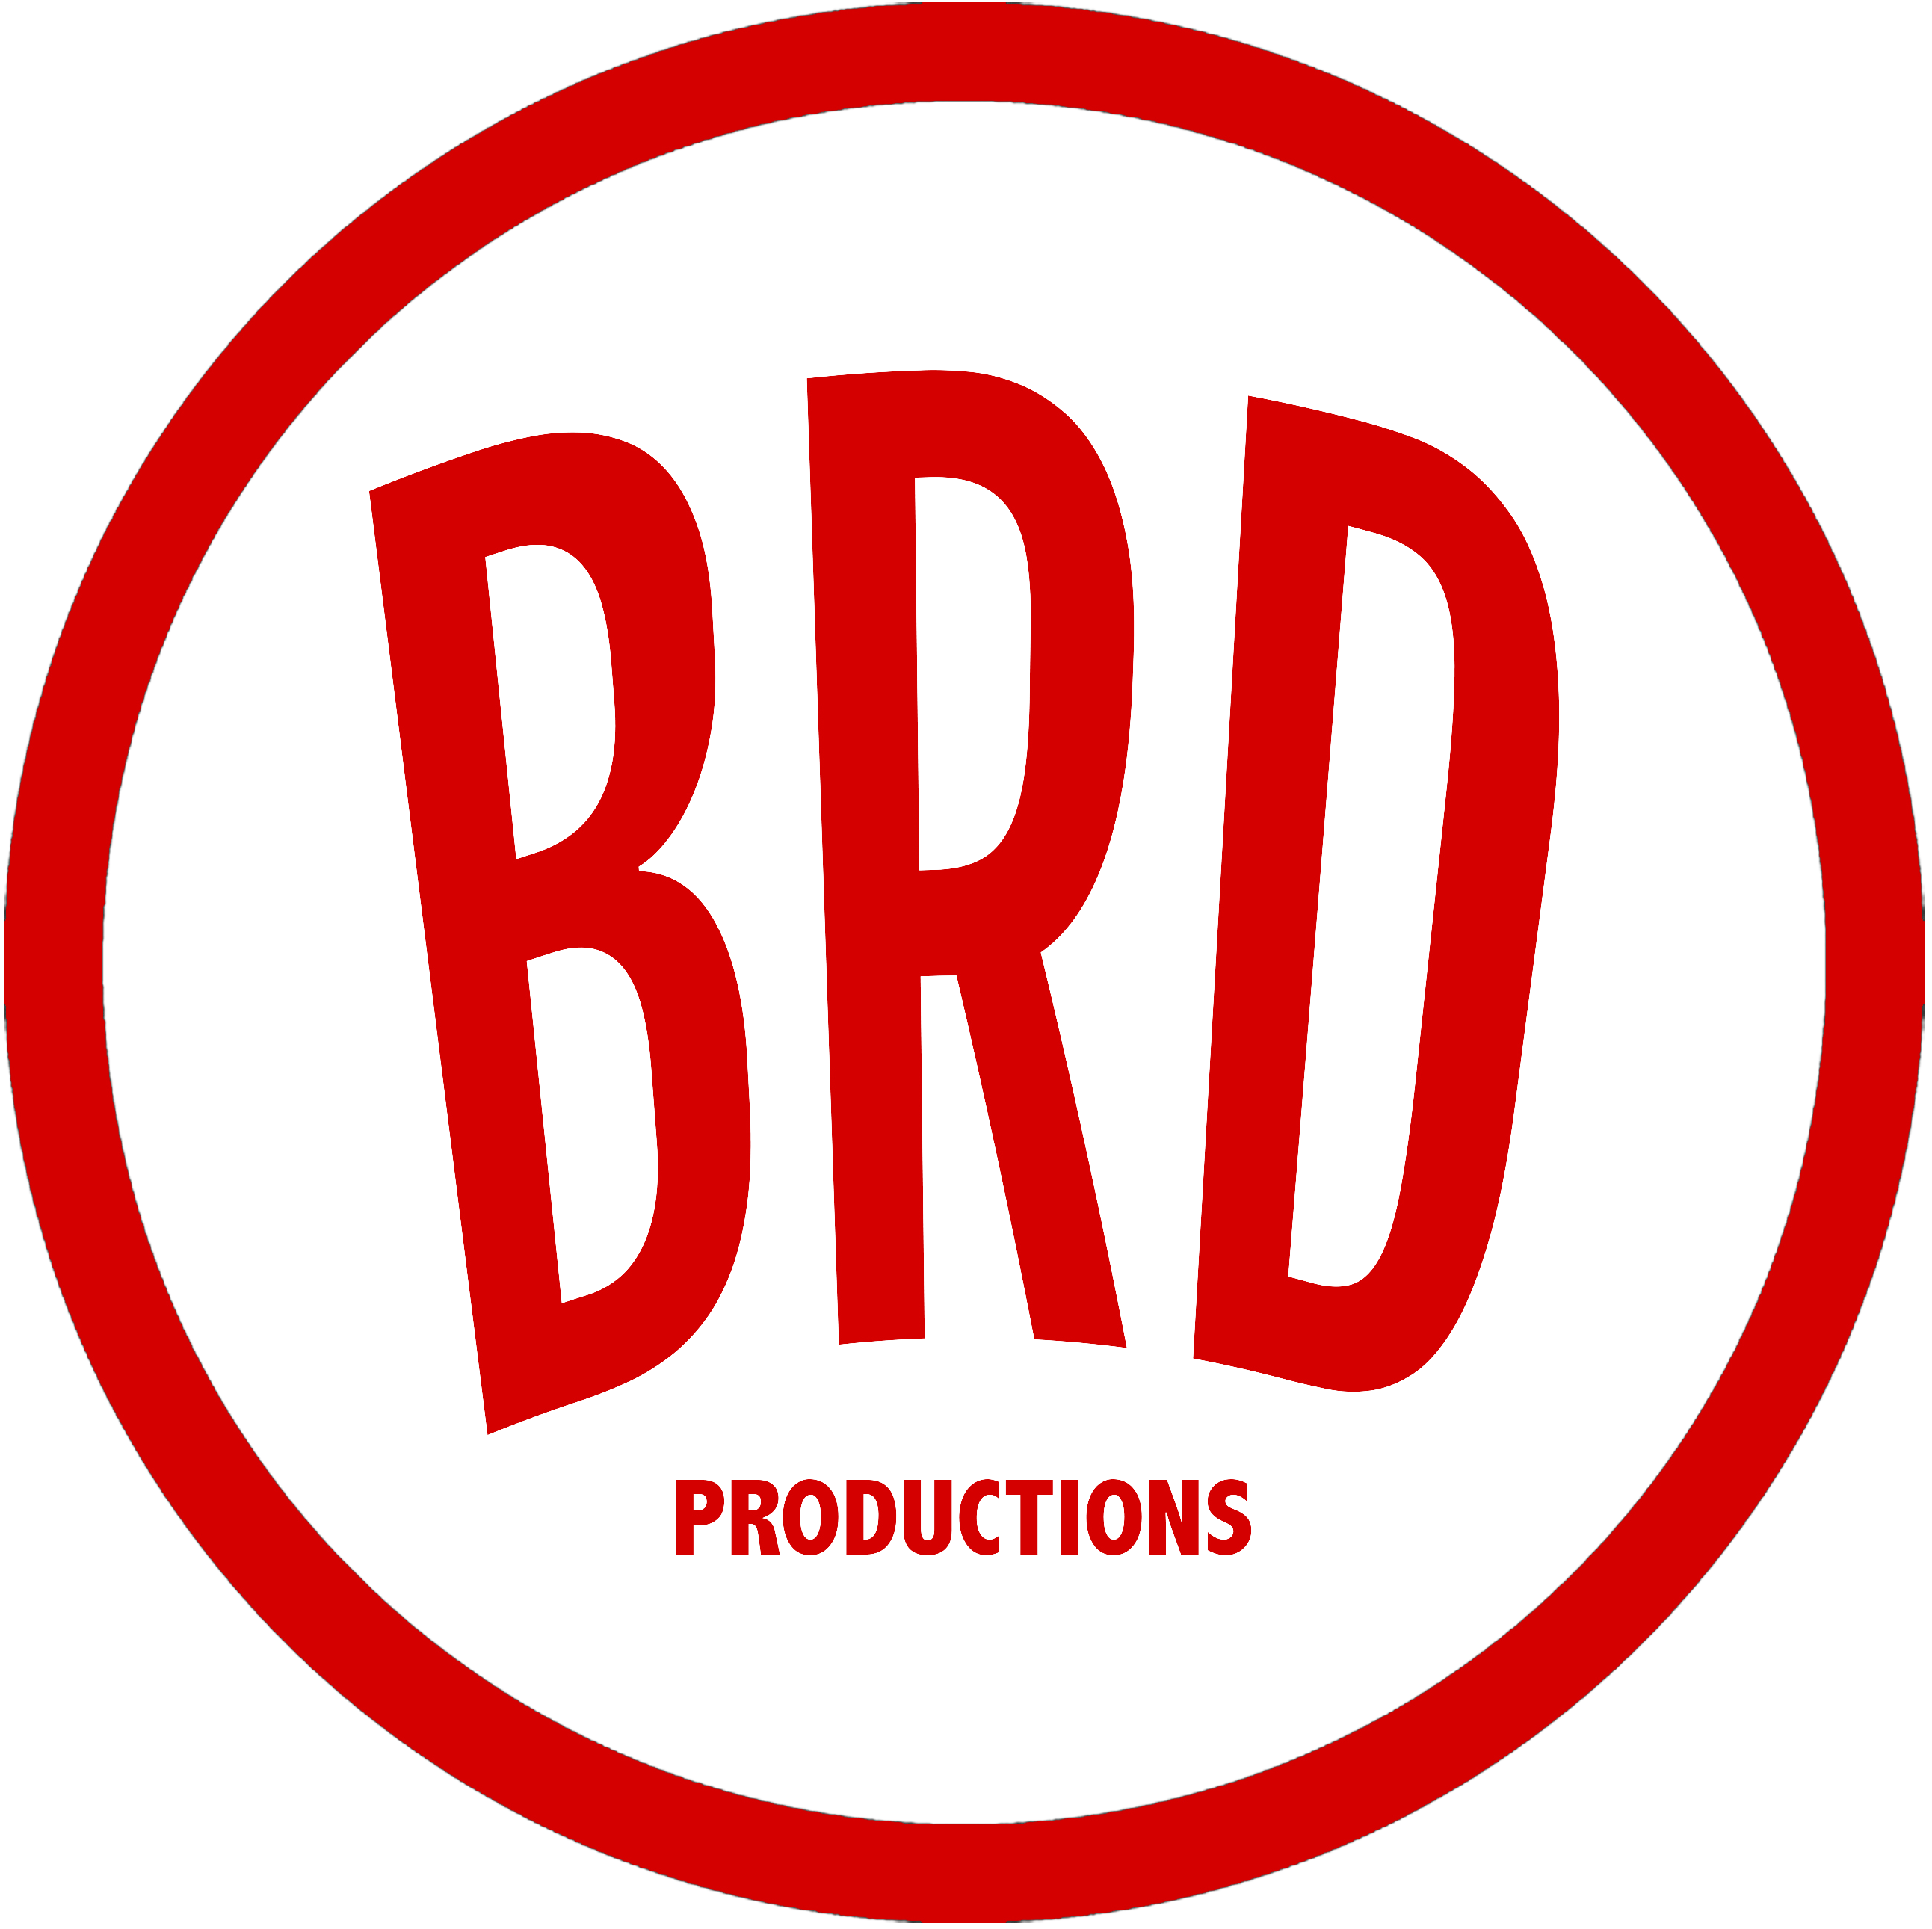 Big Red Dog Productions